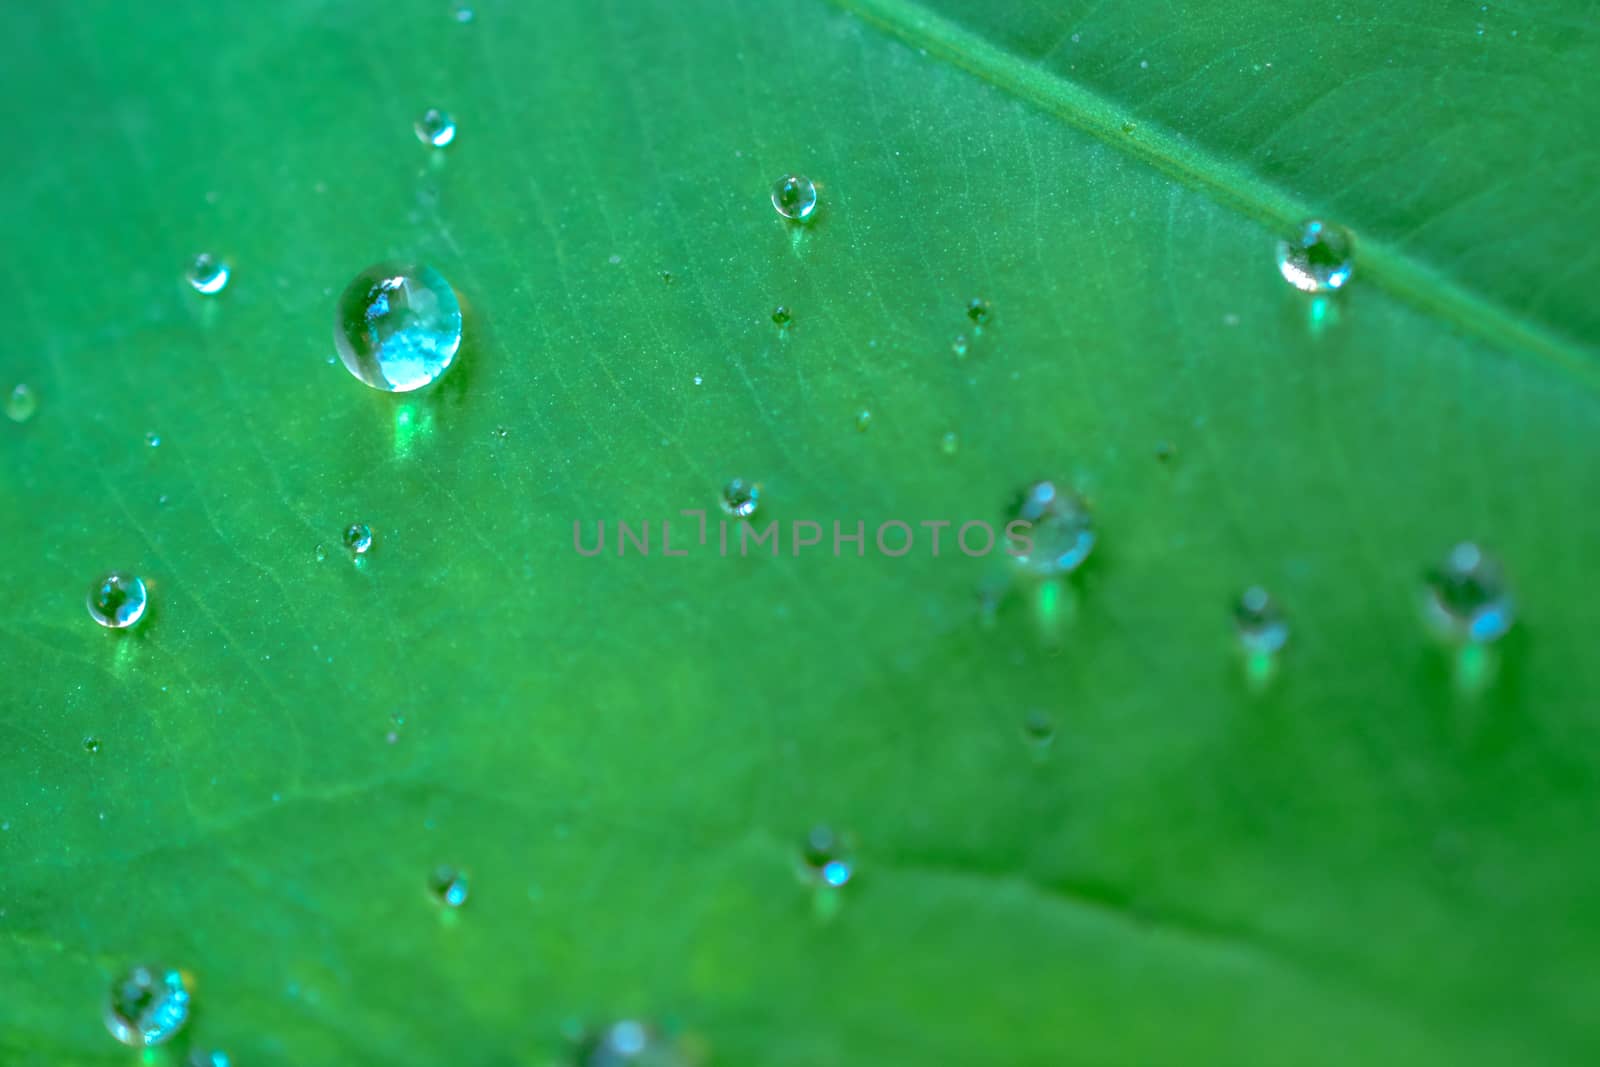 water drops on green leaves.